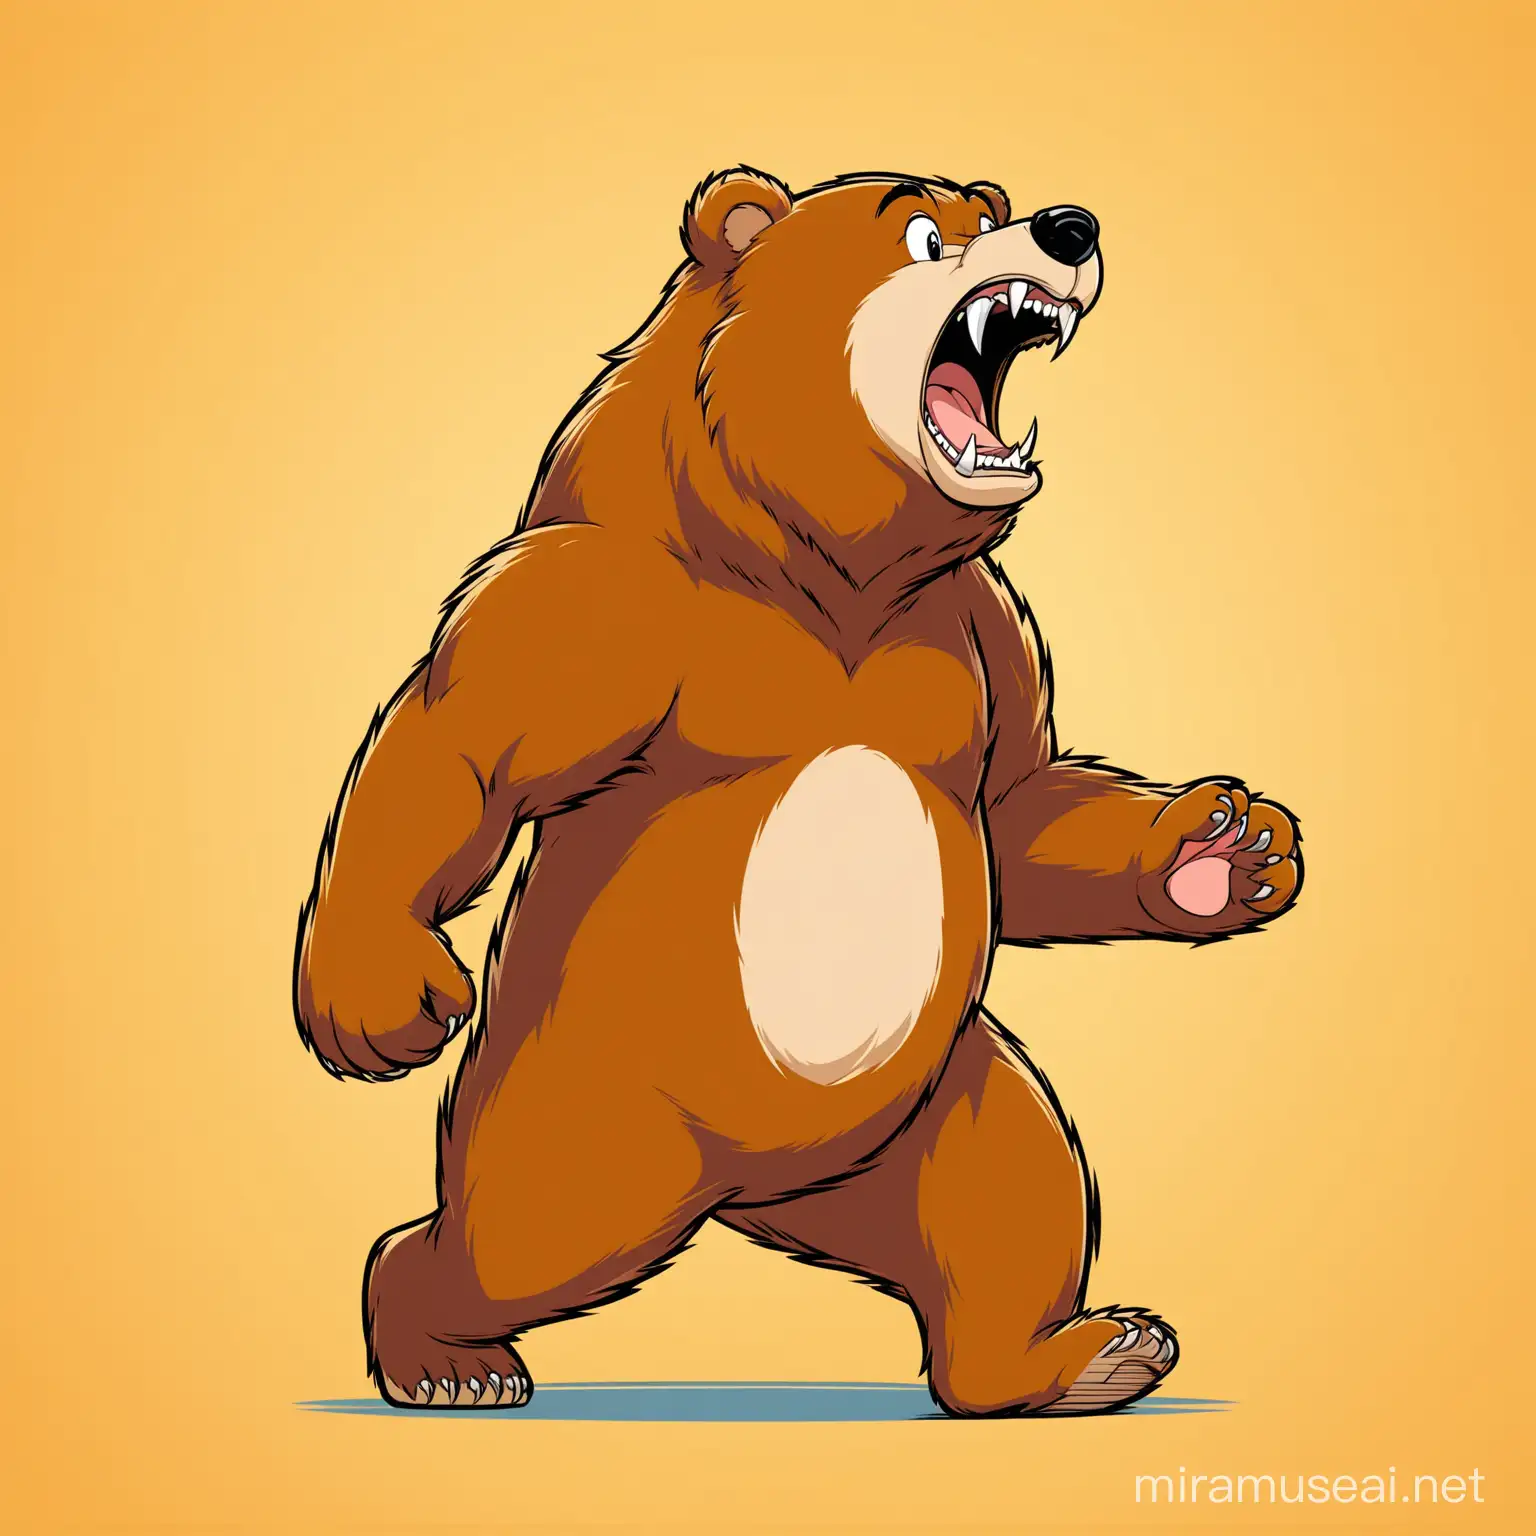 Full body cartoon bear, Side profile, roaring in the style of tom and jerry